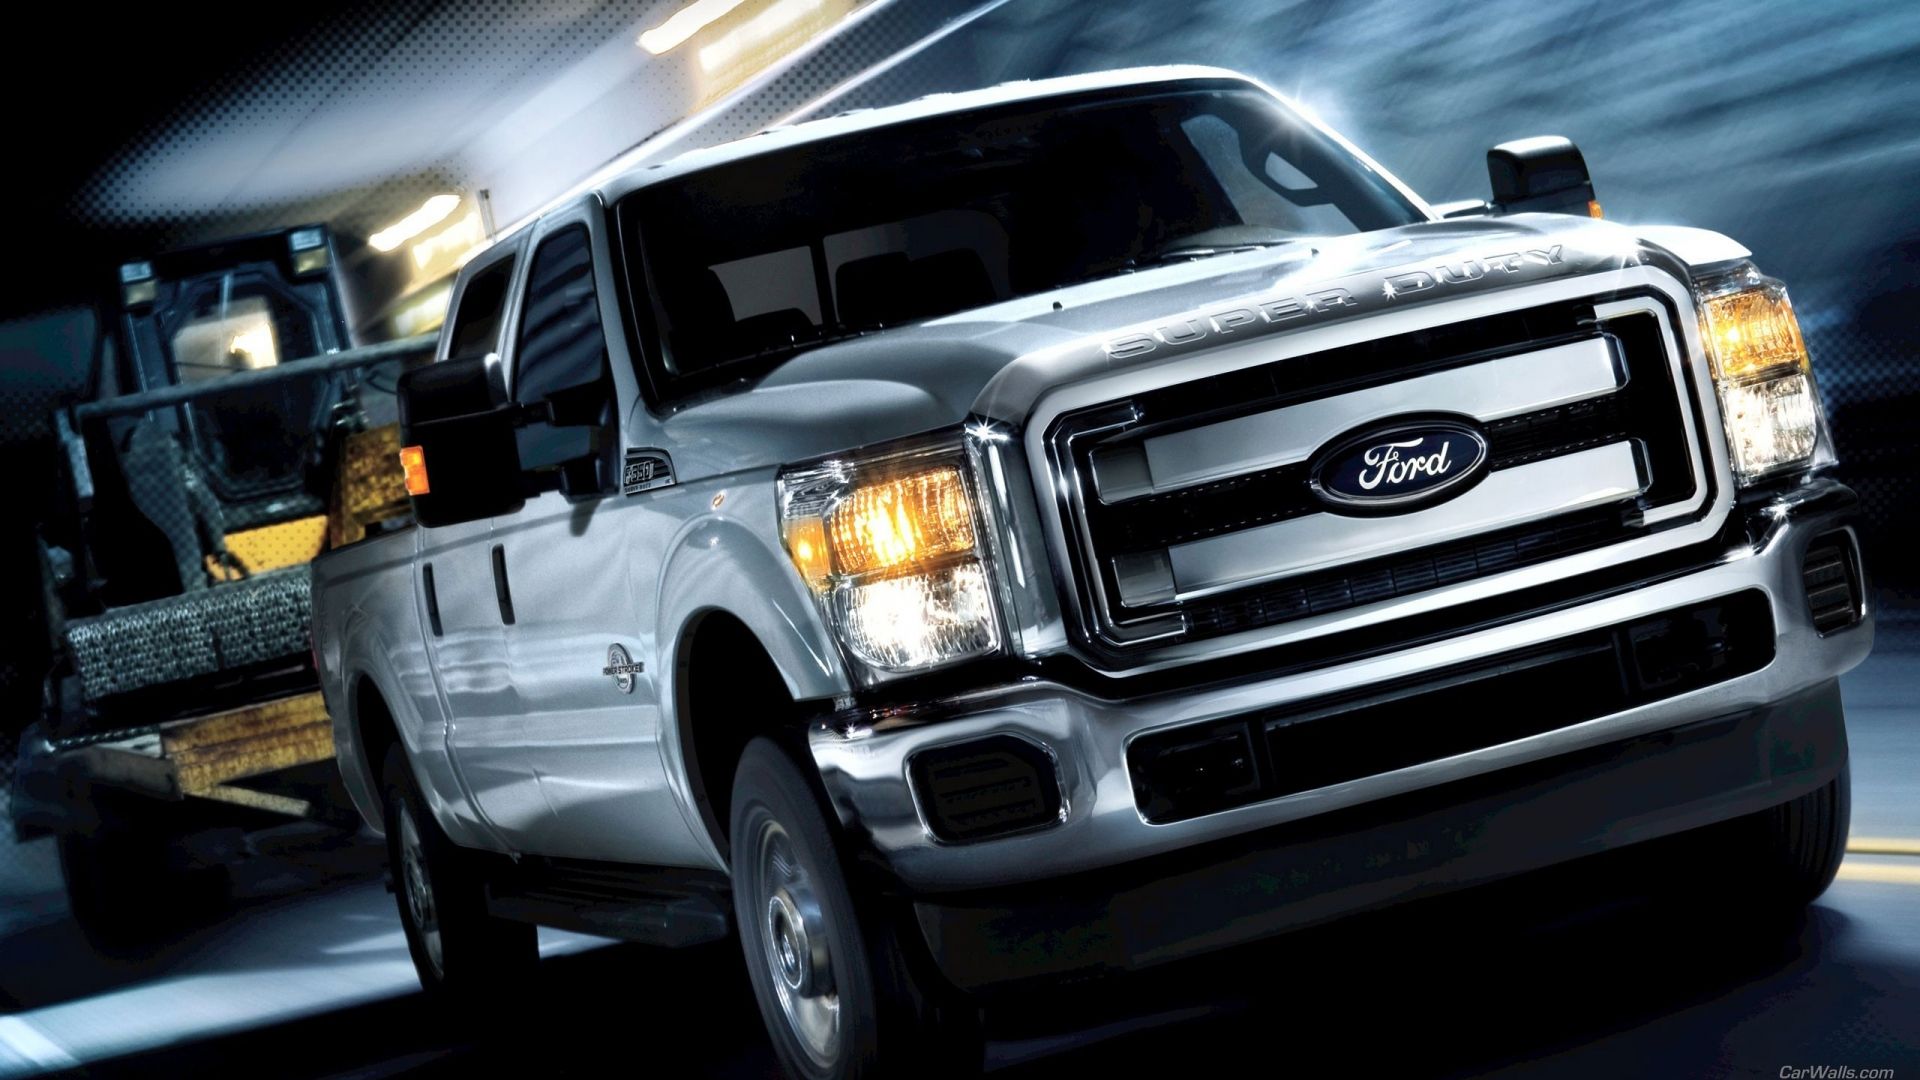 Free Download Ford F350 Cars Wallpaper 2689 PC En [2560x1600] For Your Desktop, Mobile & Tablet. Explore Ford F 350 Wallpaper. Ford F 350 Wallpaper, Ford F 150 Wallpaper, Ford F 150 Wallpaper